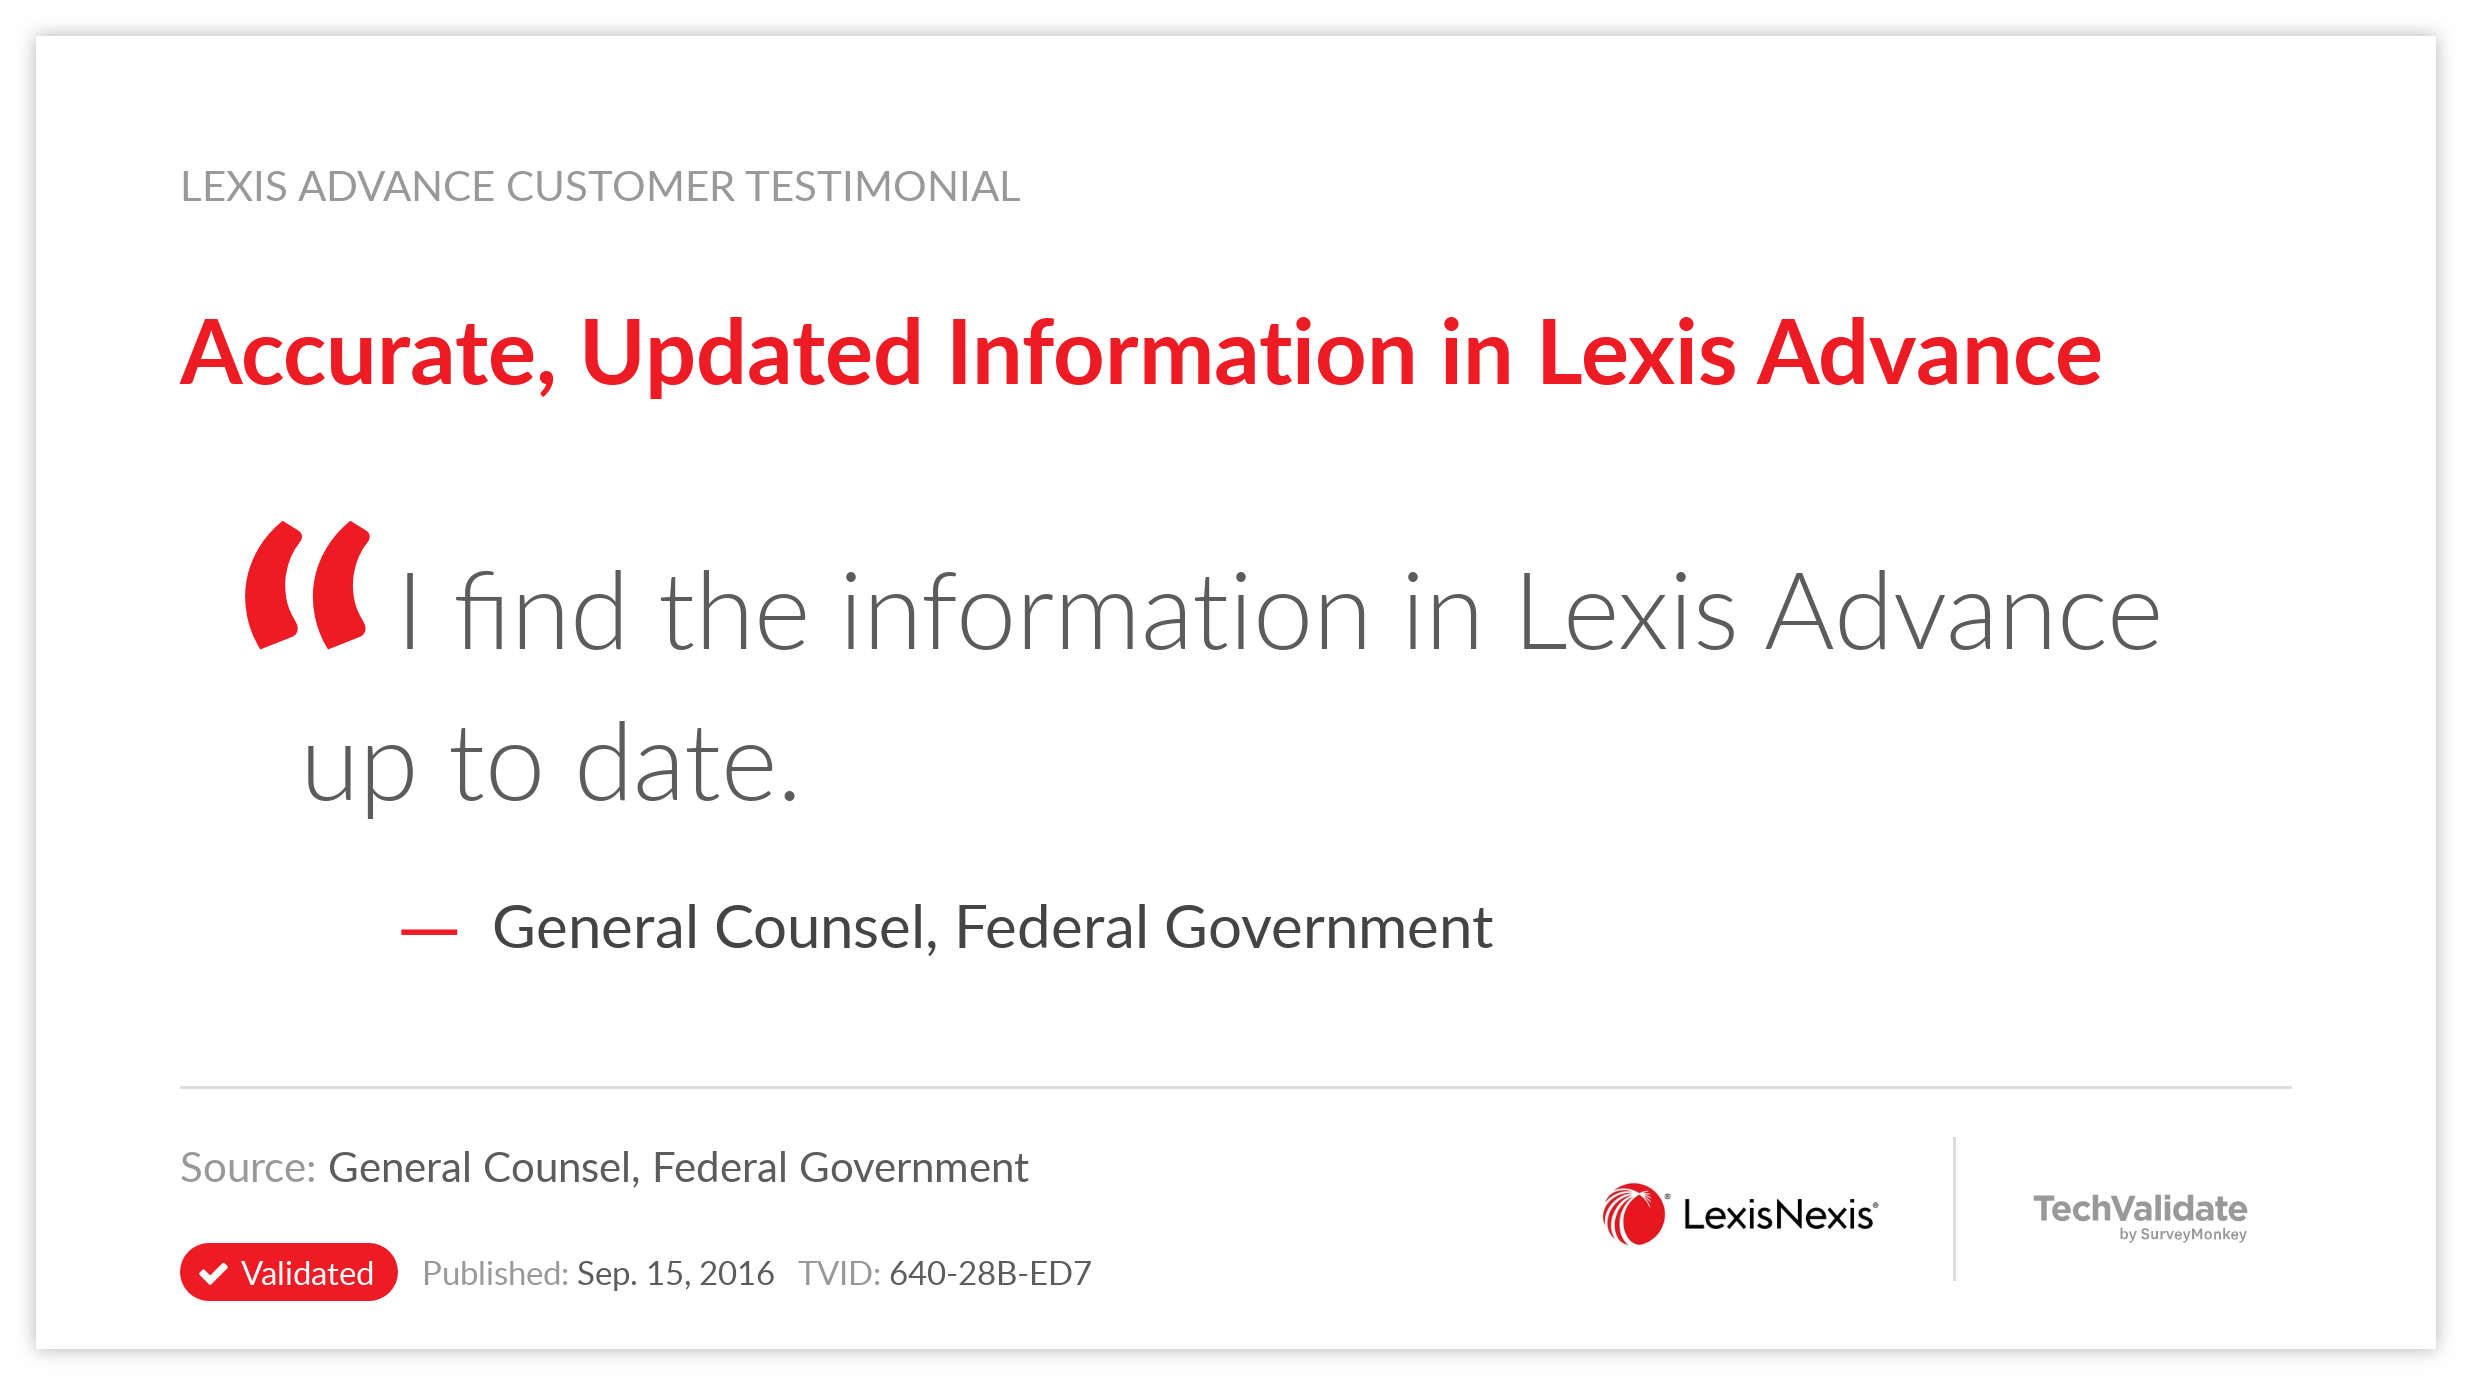 Accurate, Updated Information in Lexis Advance